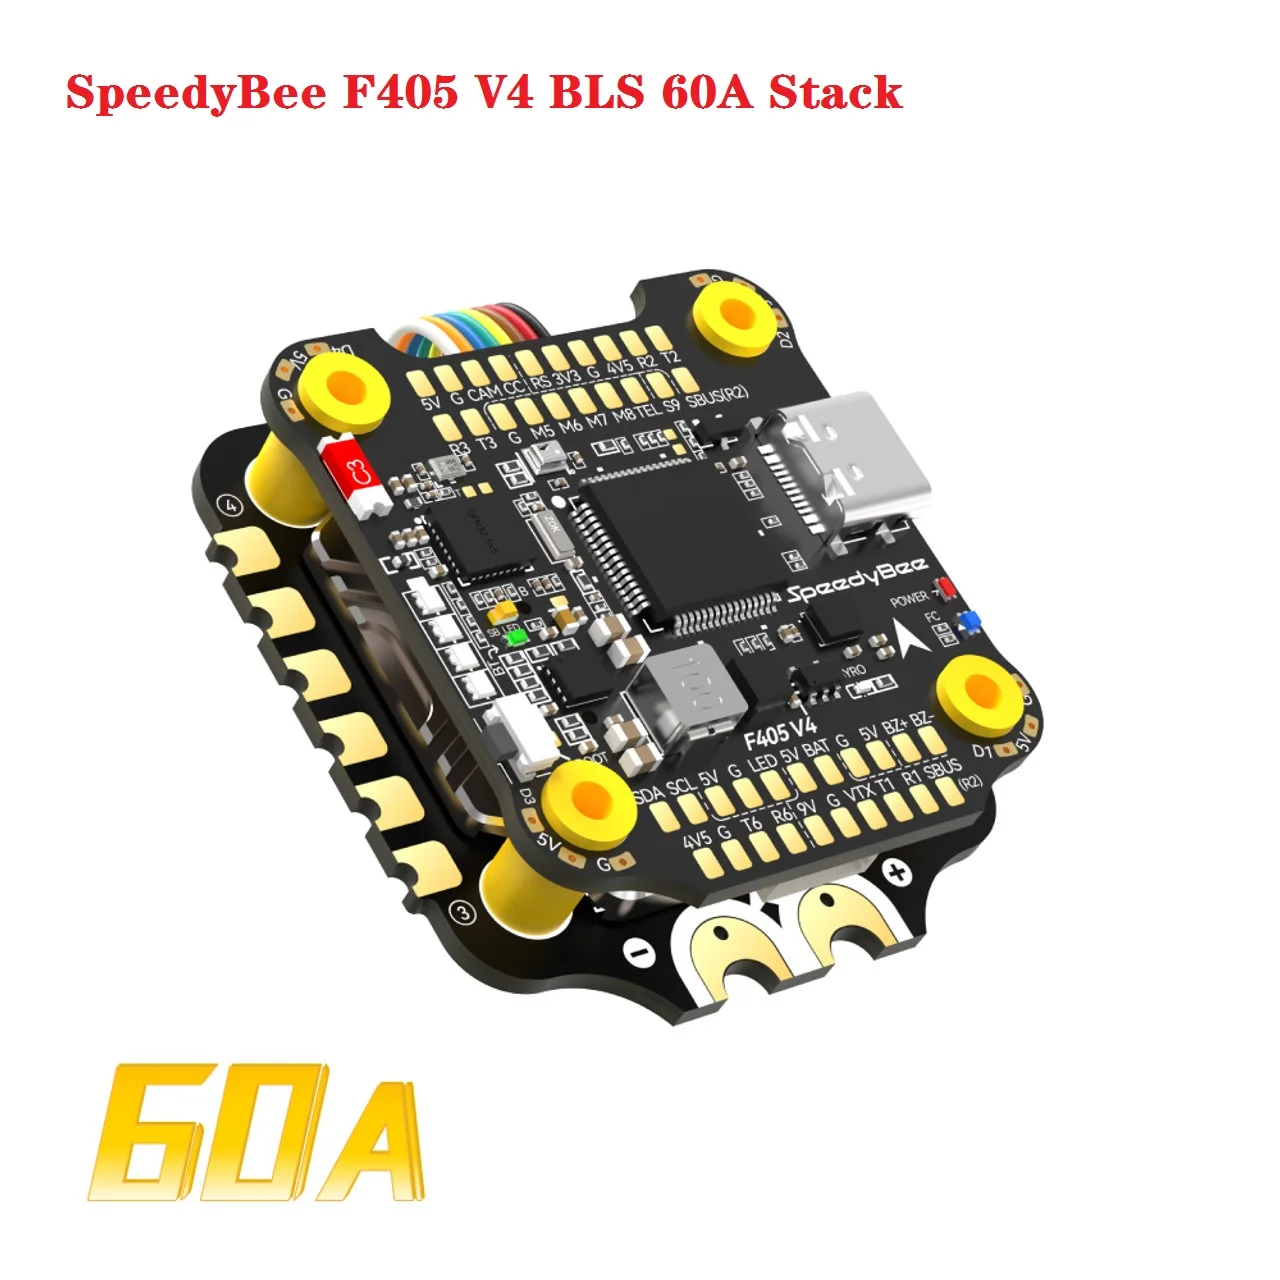 

SpeedyBee F405 V4 BLS 60A/55A 30x30 FC&ESC Flight Controller Stack BLHELIS 60A/55A 4in1 ESC for FPV Freestyle Drones DIY Parts